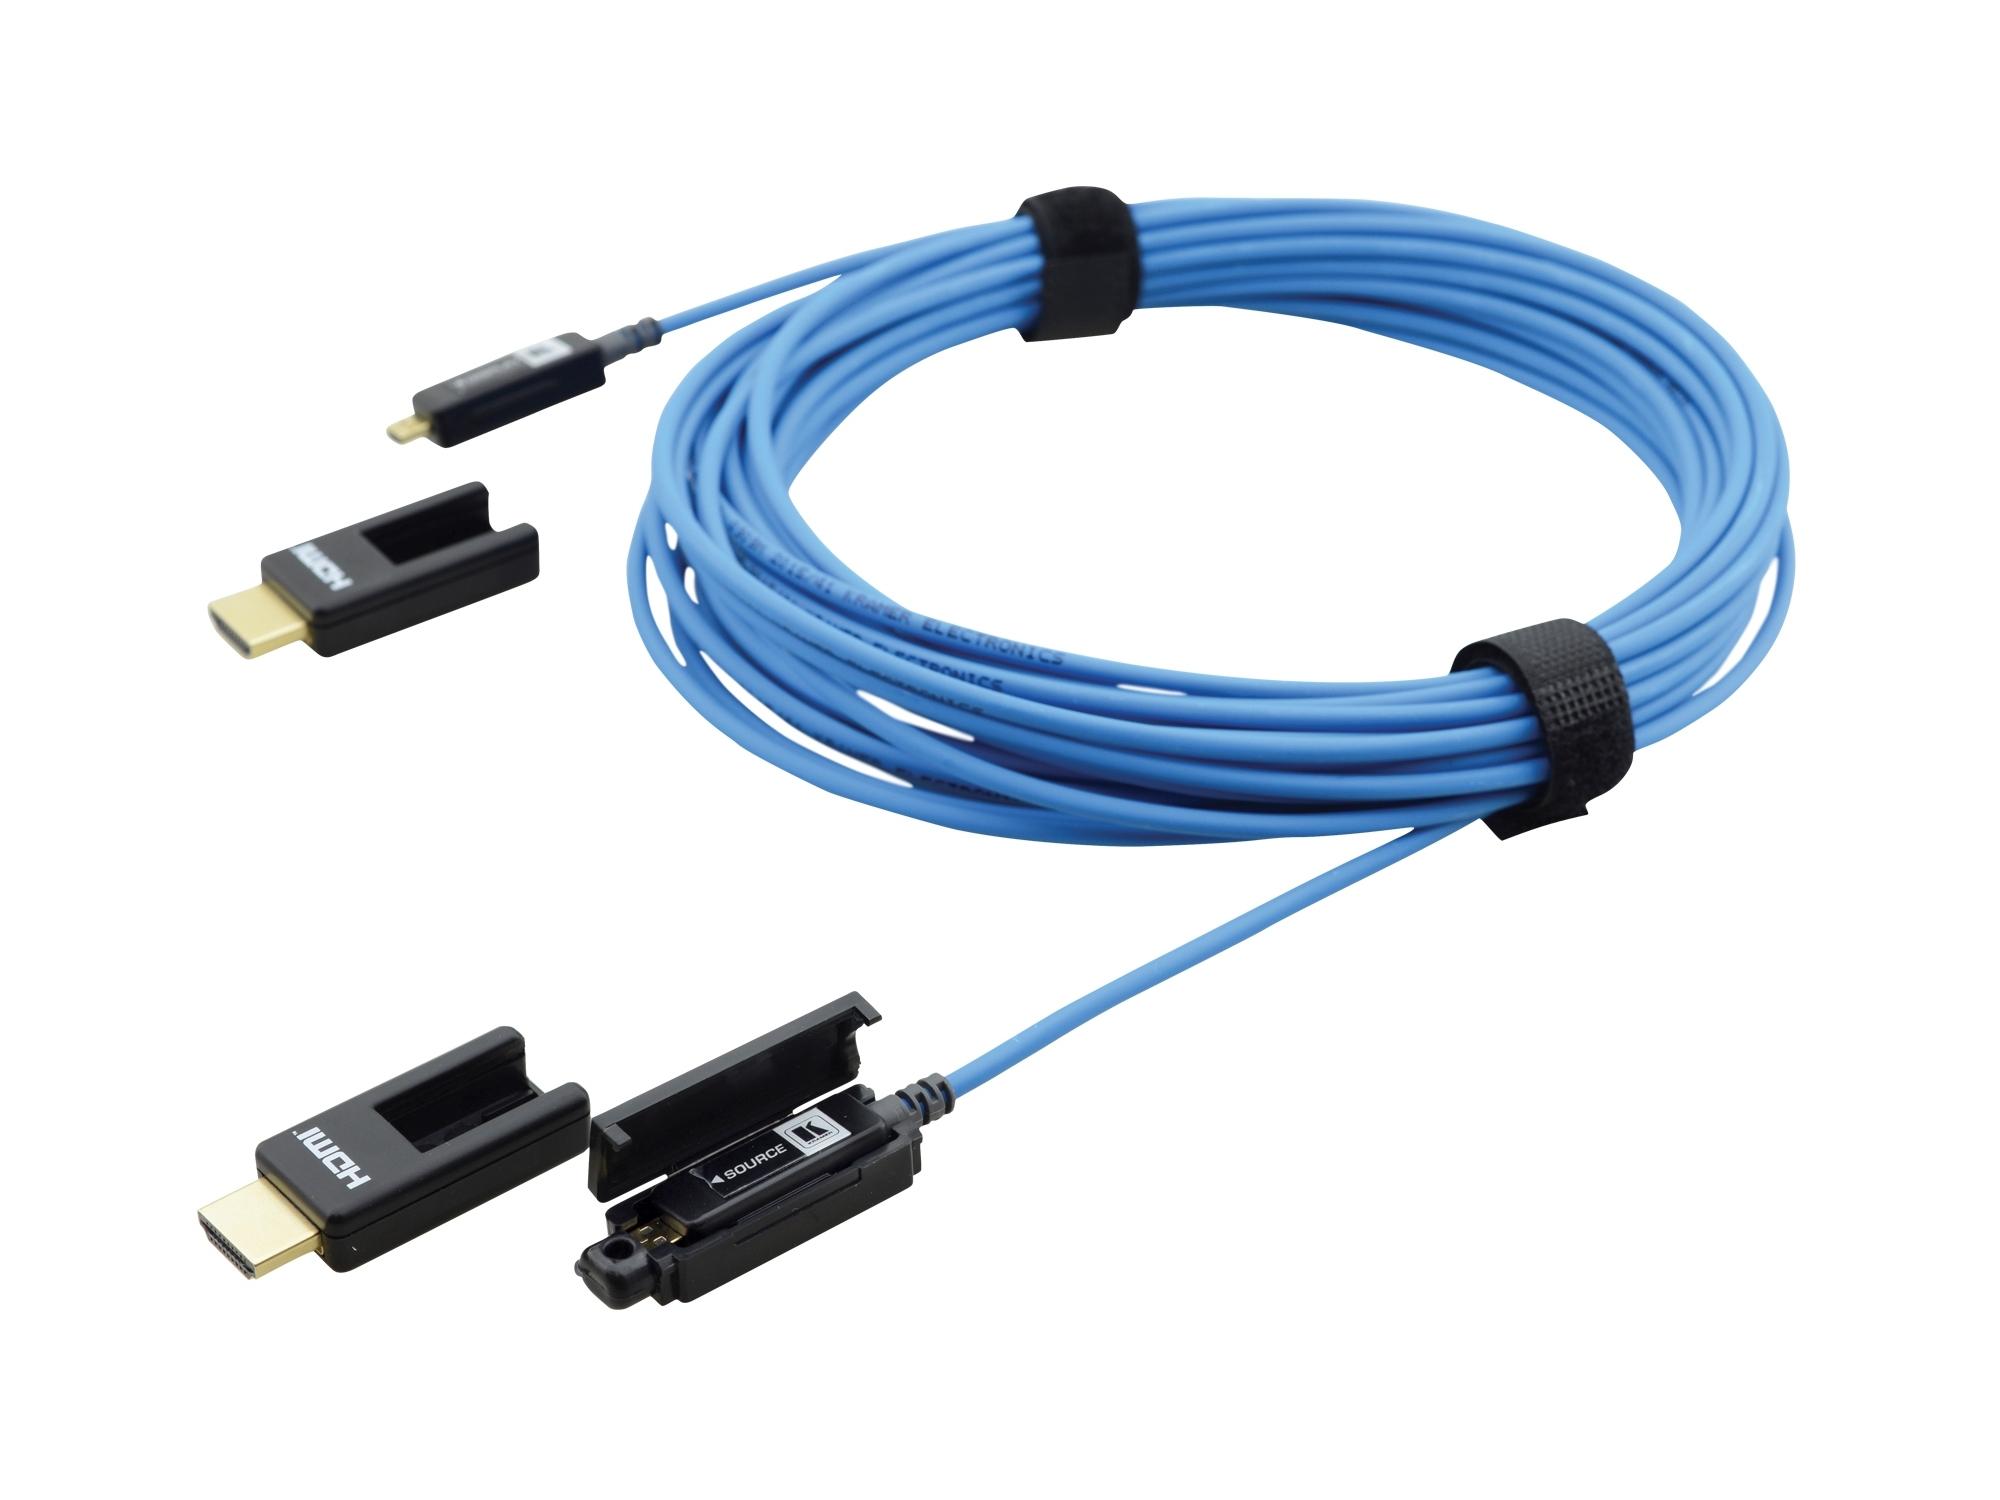 CP-AOCH/XL-164 Fiber Optic High-Speed Pluggable HDMI Cable - 164 ft by Kramer